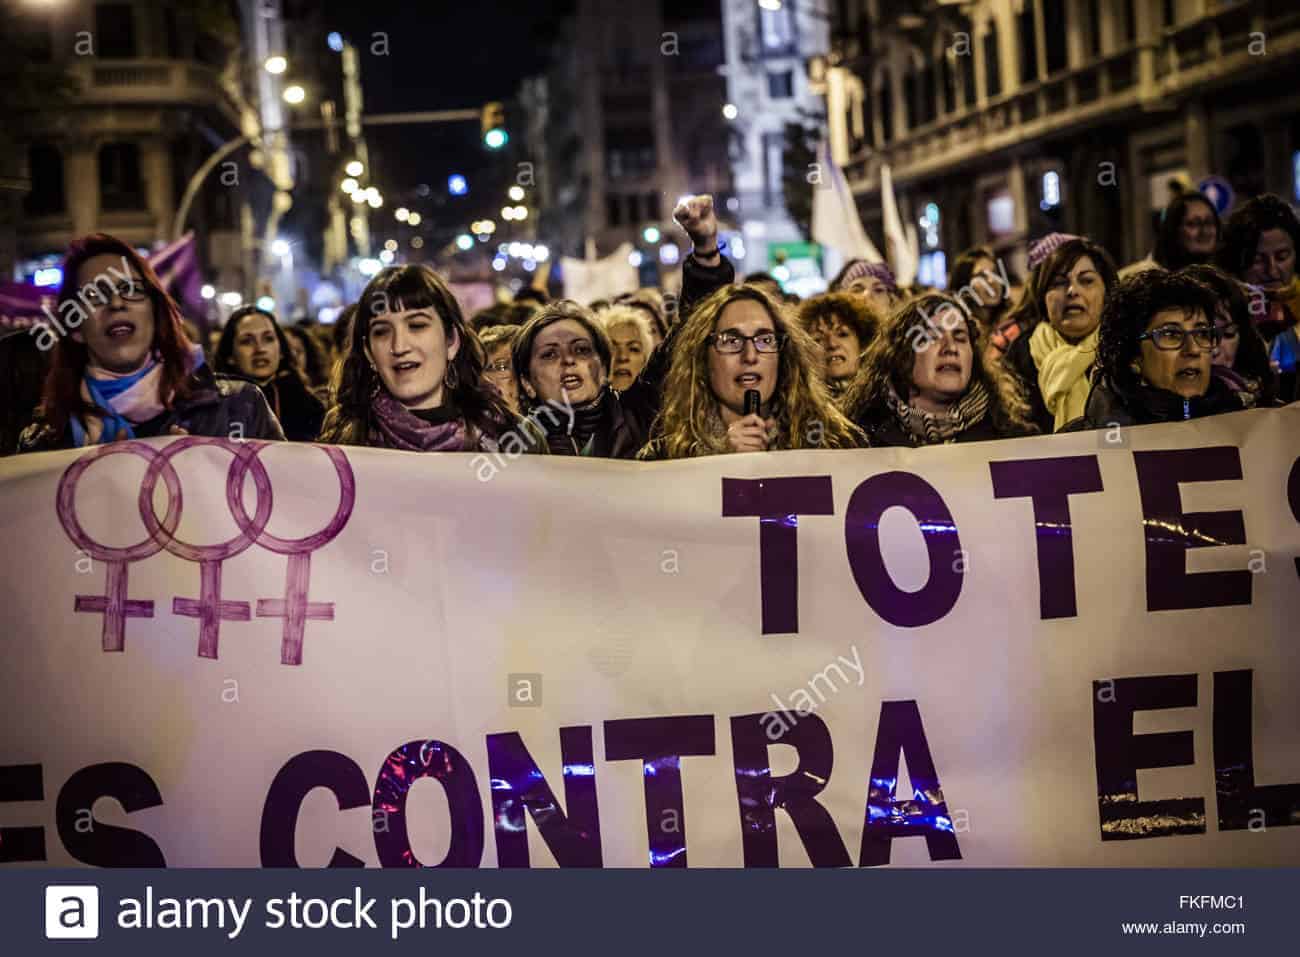 Feminist Cancer Killing Spain and West